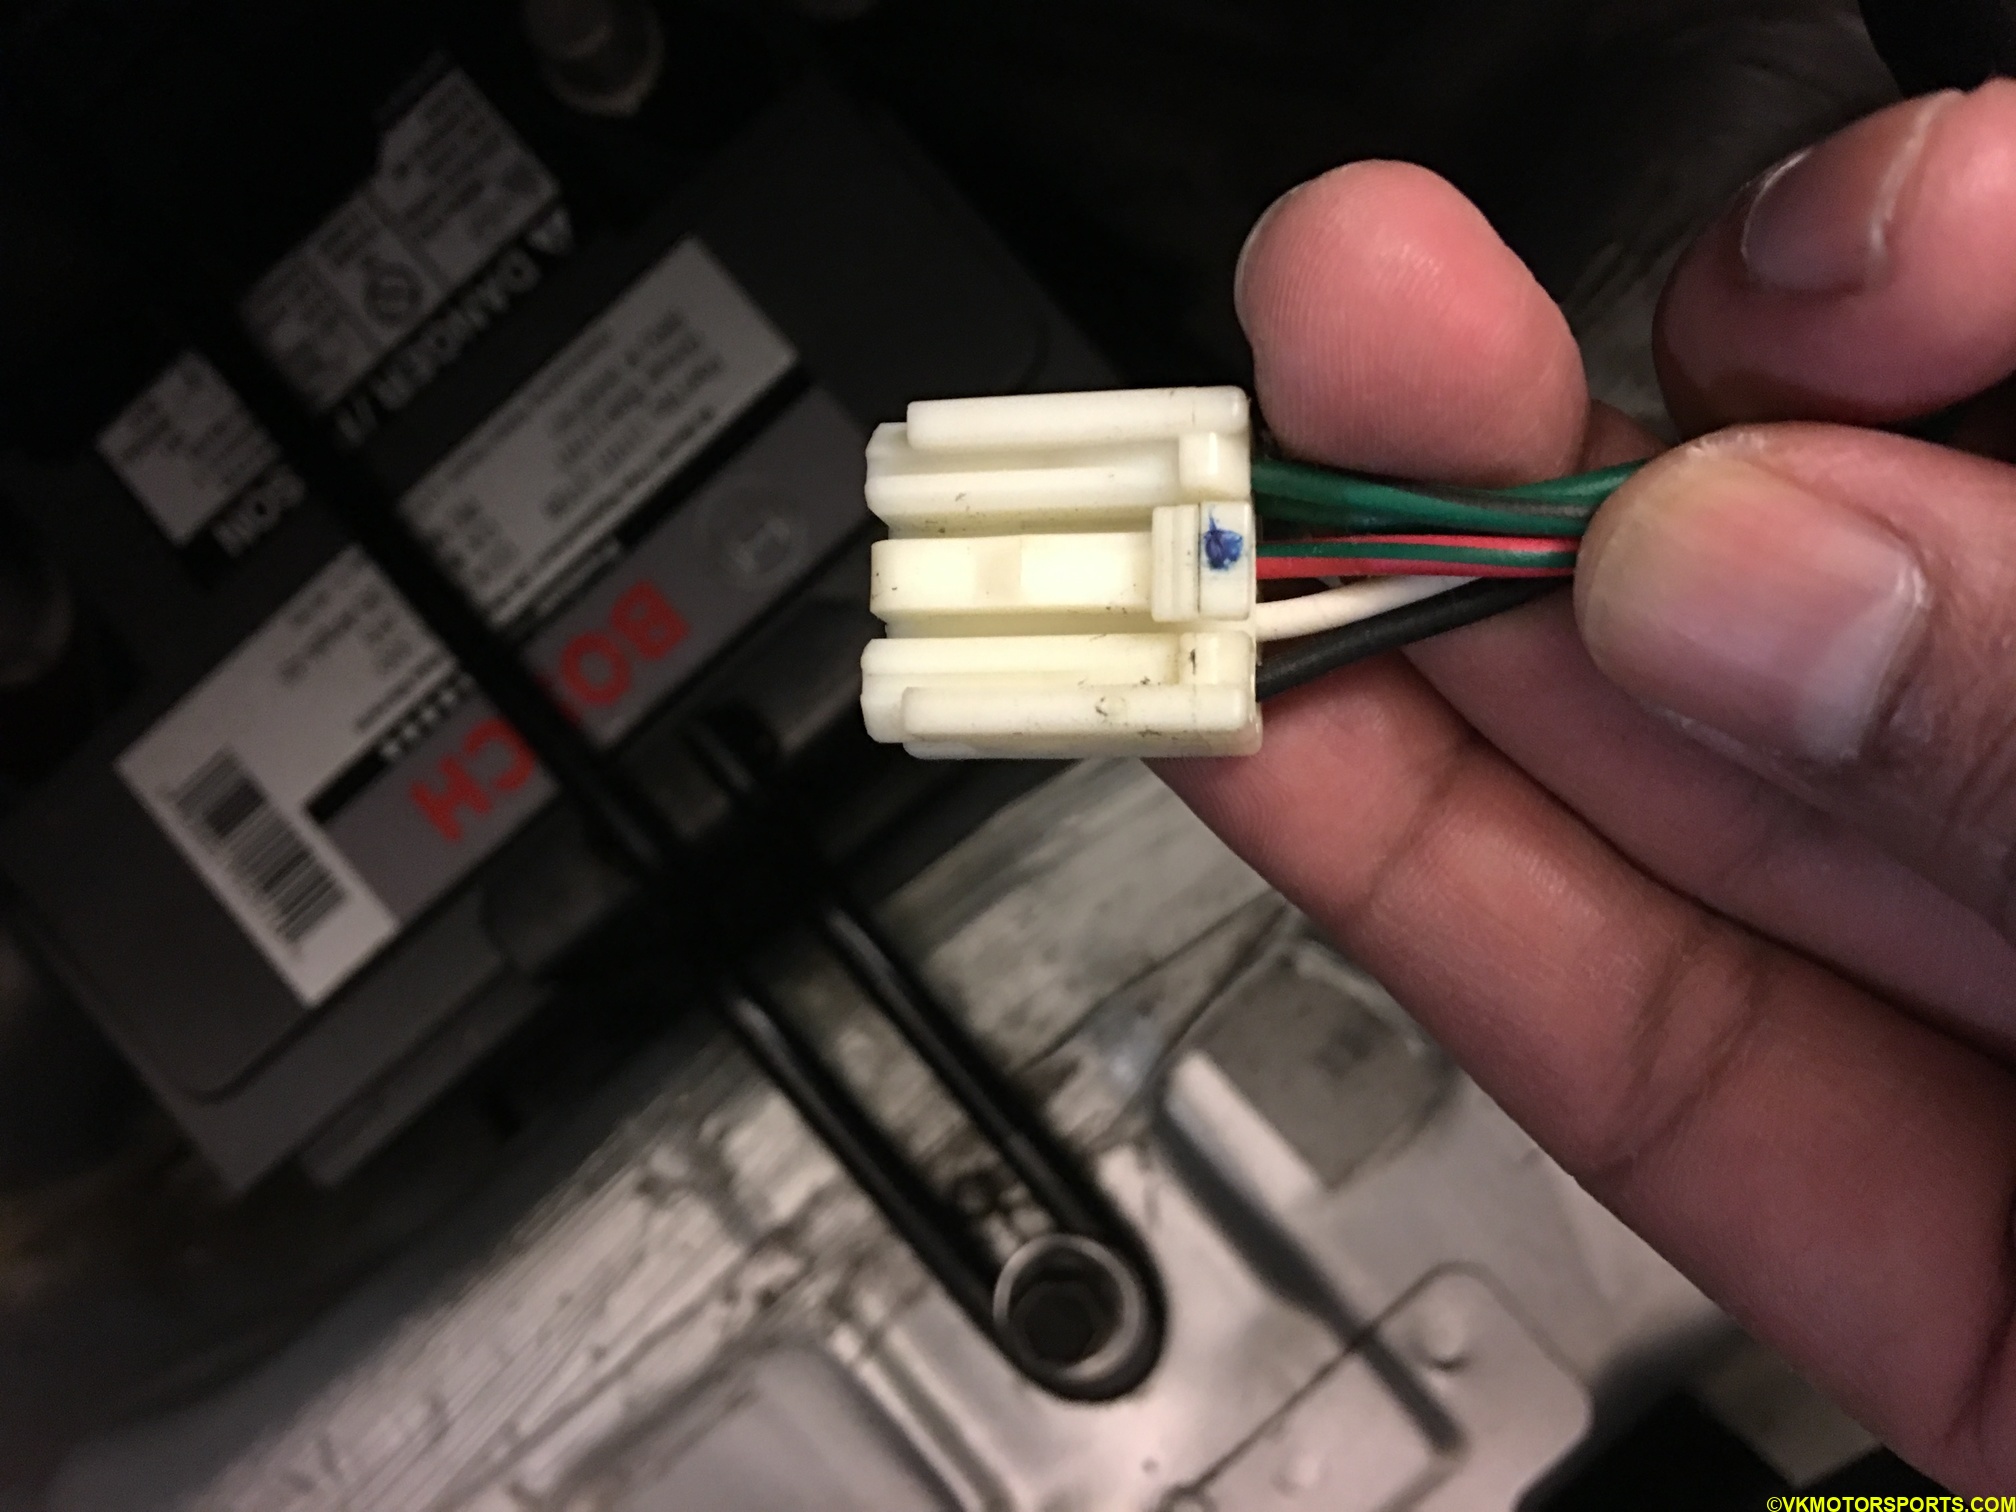 Electrical connector disconnected